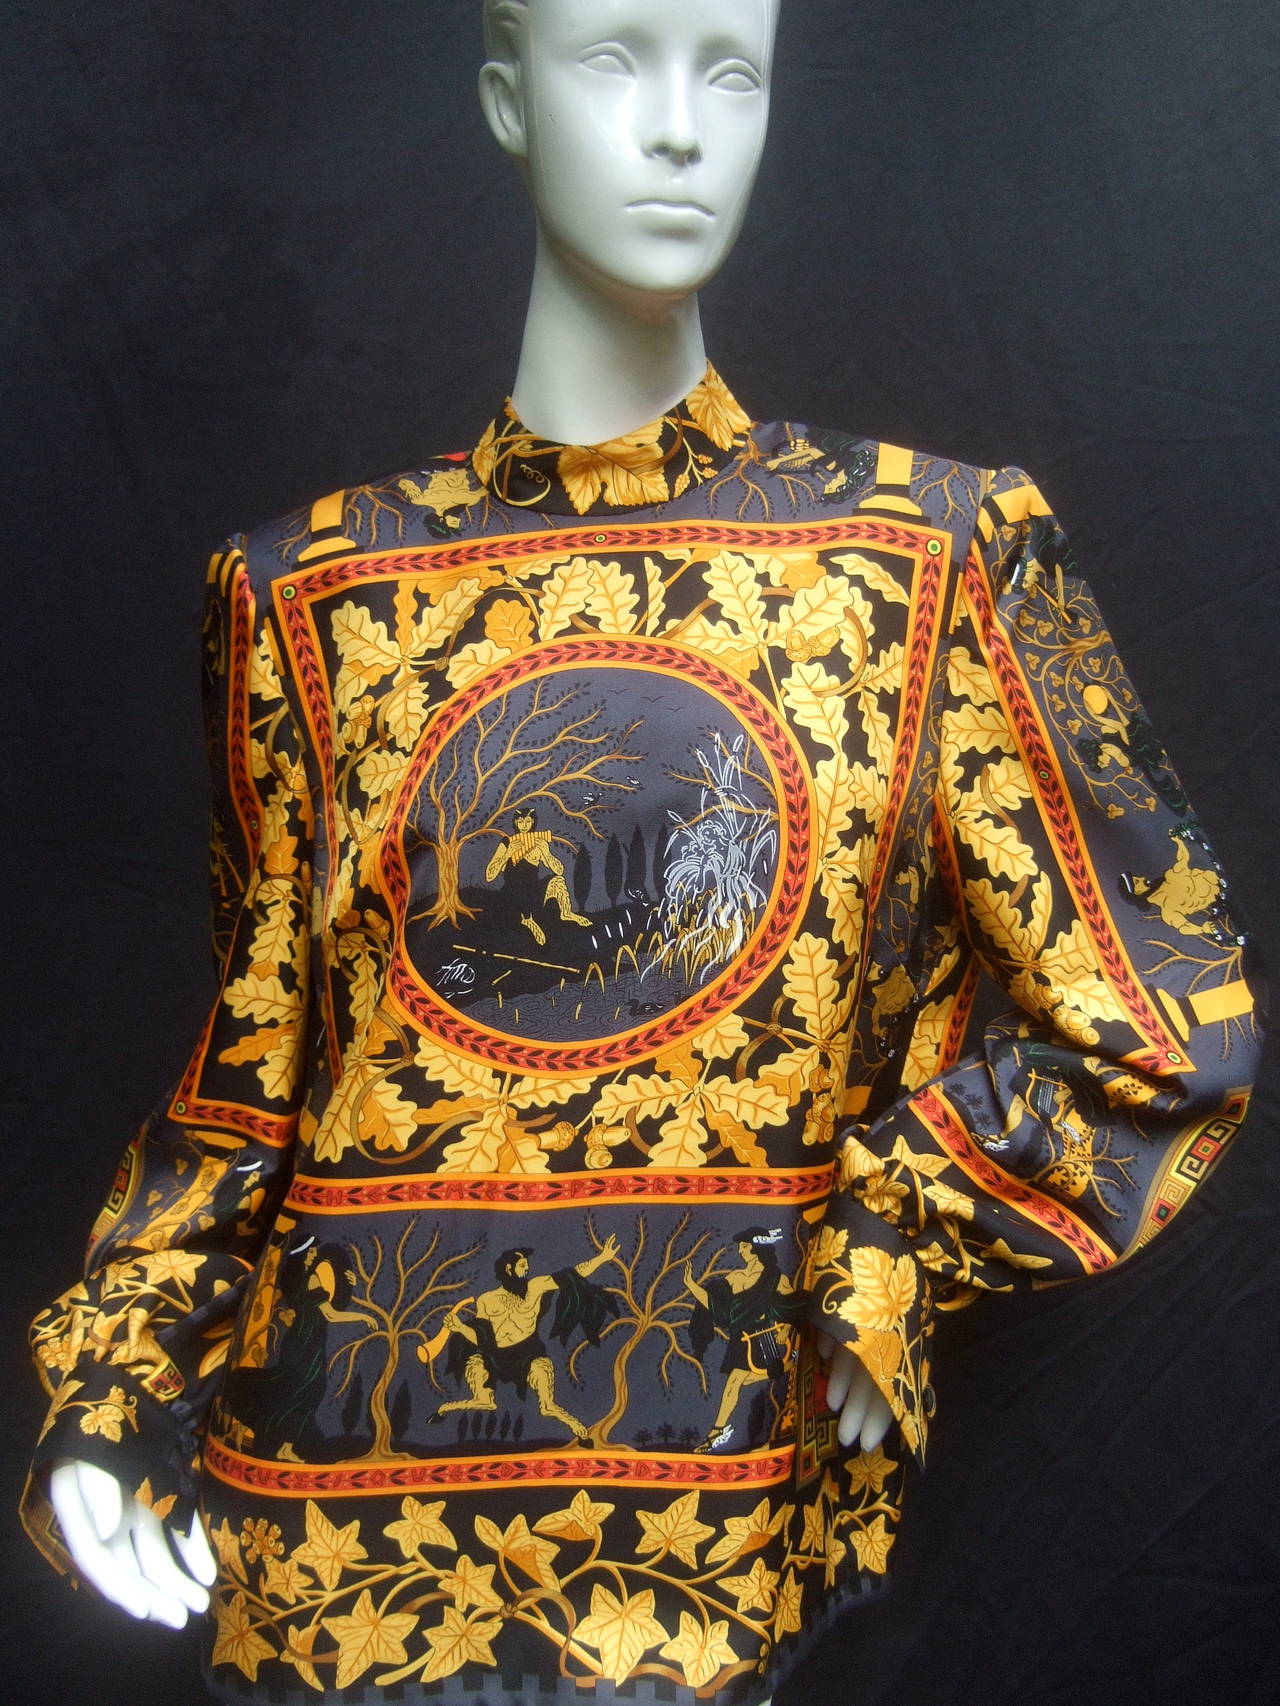 Stunning Hermes mythical Gods of Greece silk blouse c 1980s 
The spectacular Eypine print is illustrated telling the story of the
gods of Greece. The center piece of the extraordinary silk blouse
depicts pan playing his pipes surrounded with oaks